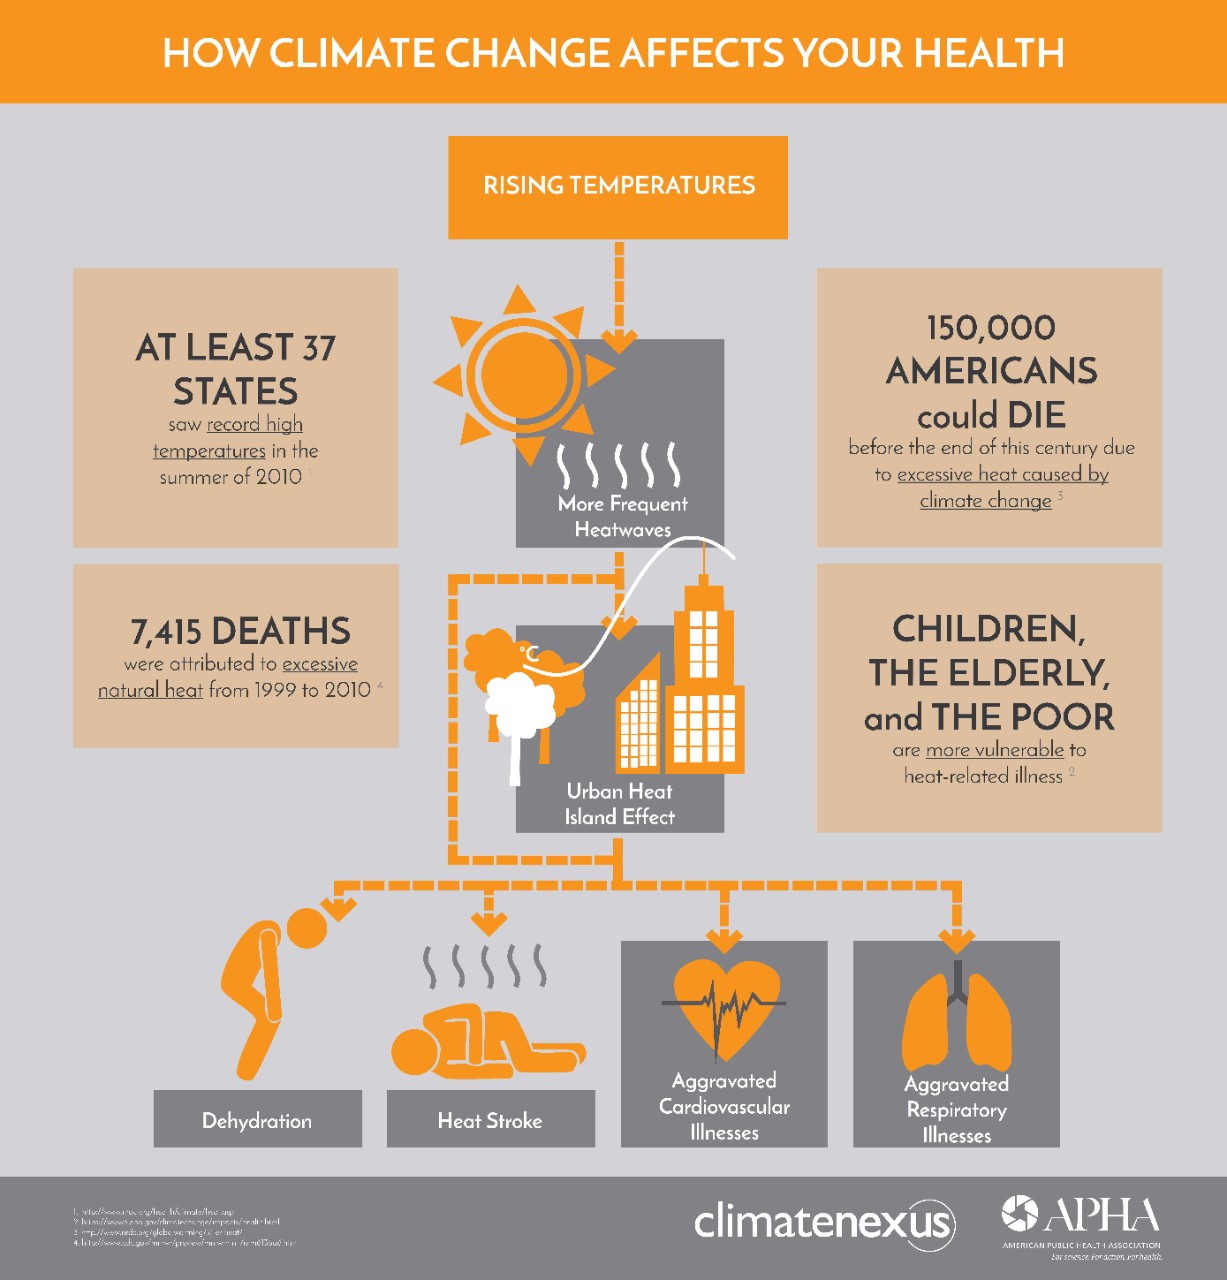 APHA_how_climate_affects_health_rising_temperatures